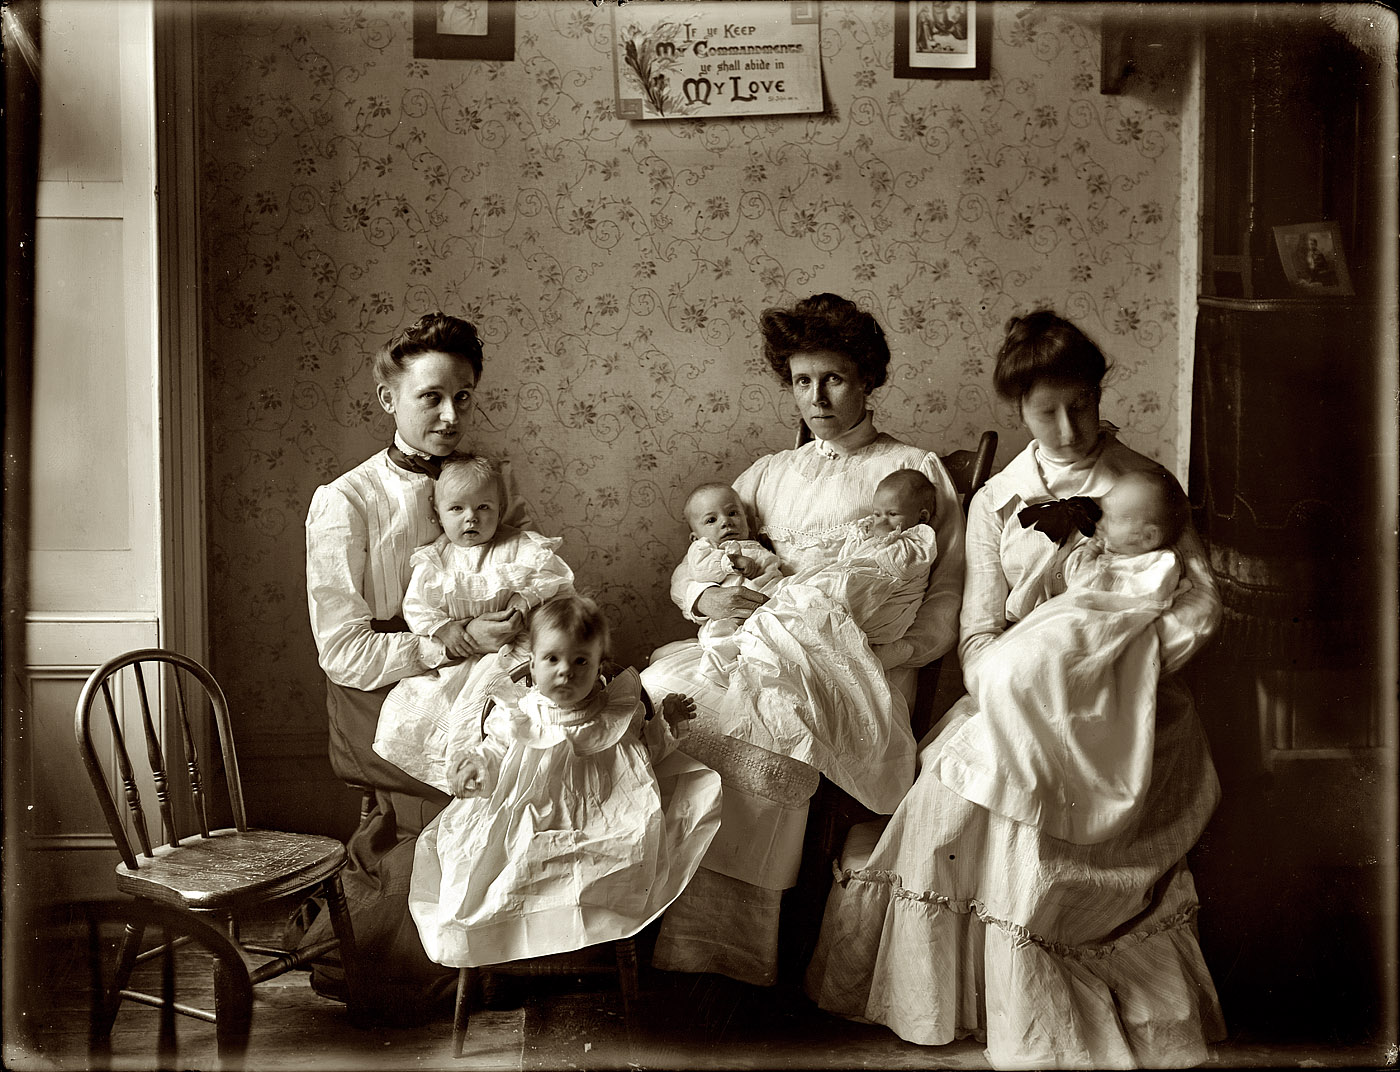 New York, 1908. "Children's Aid Society." View full size. 8x10 glass negative, George Grantham Bain Collection, Library of Congress.